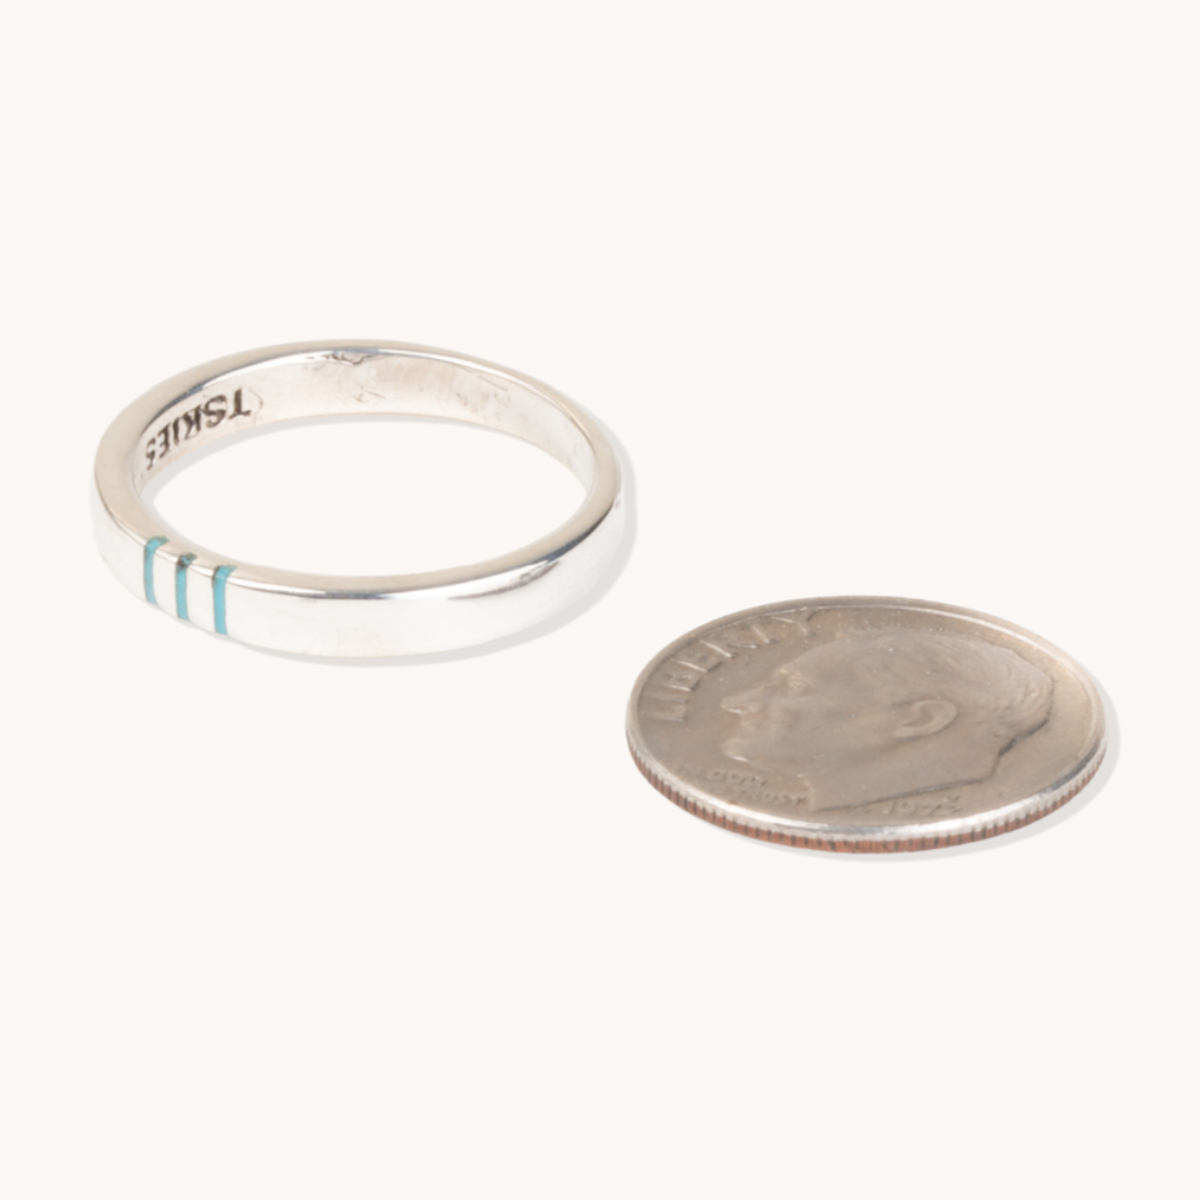 Turquoise Band Ring | T.Skies Jewelry